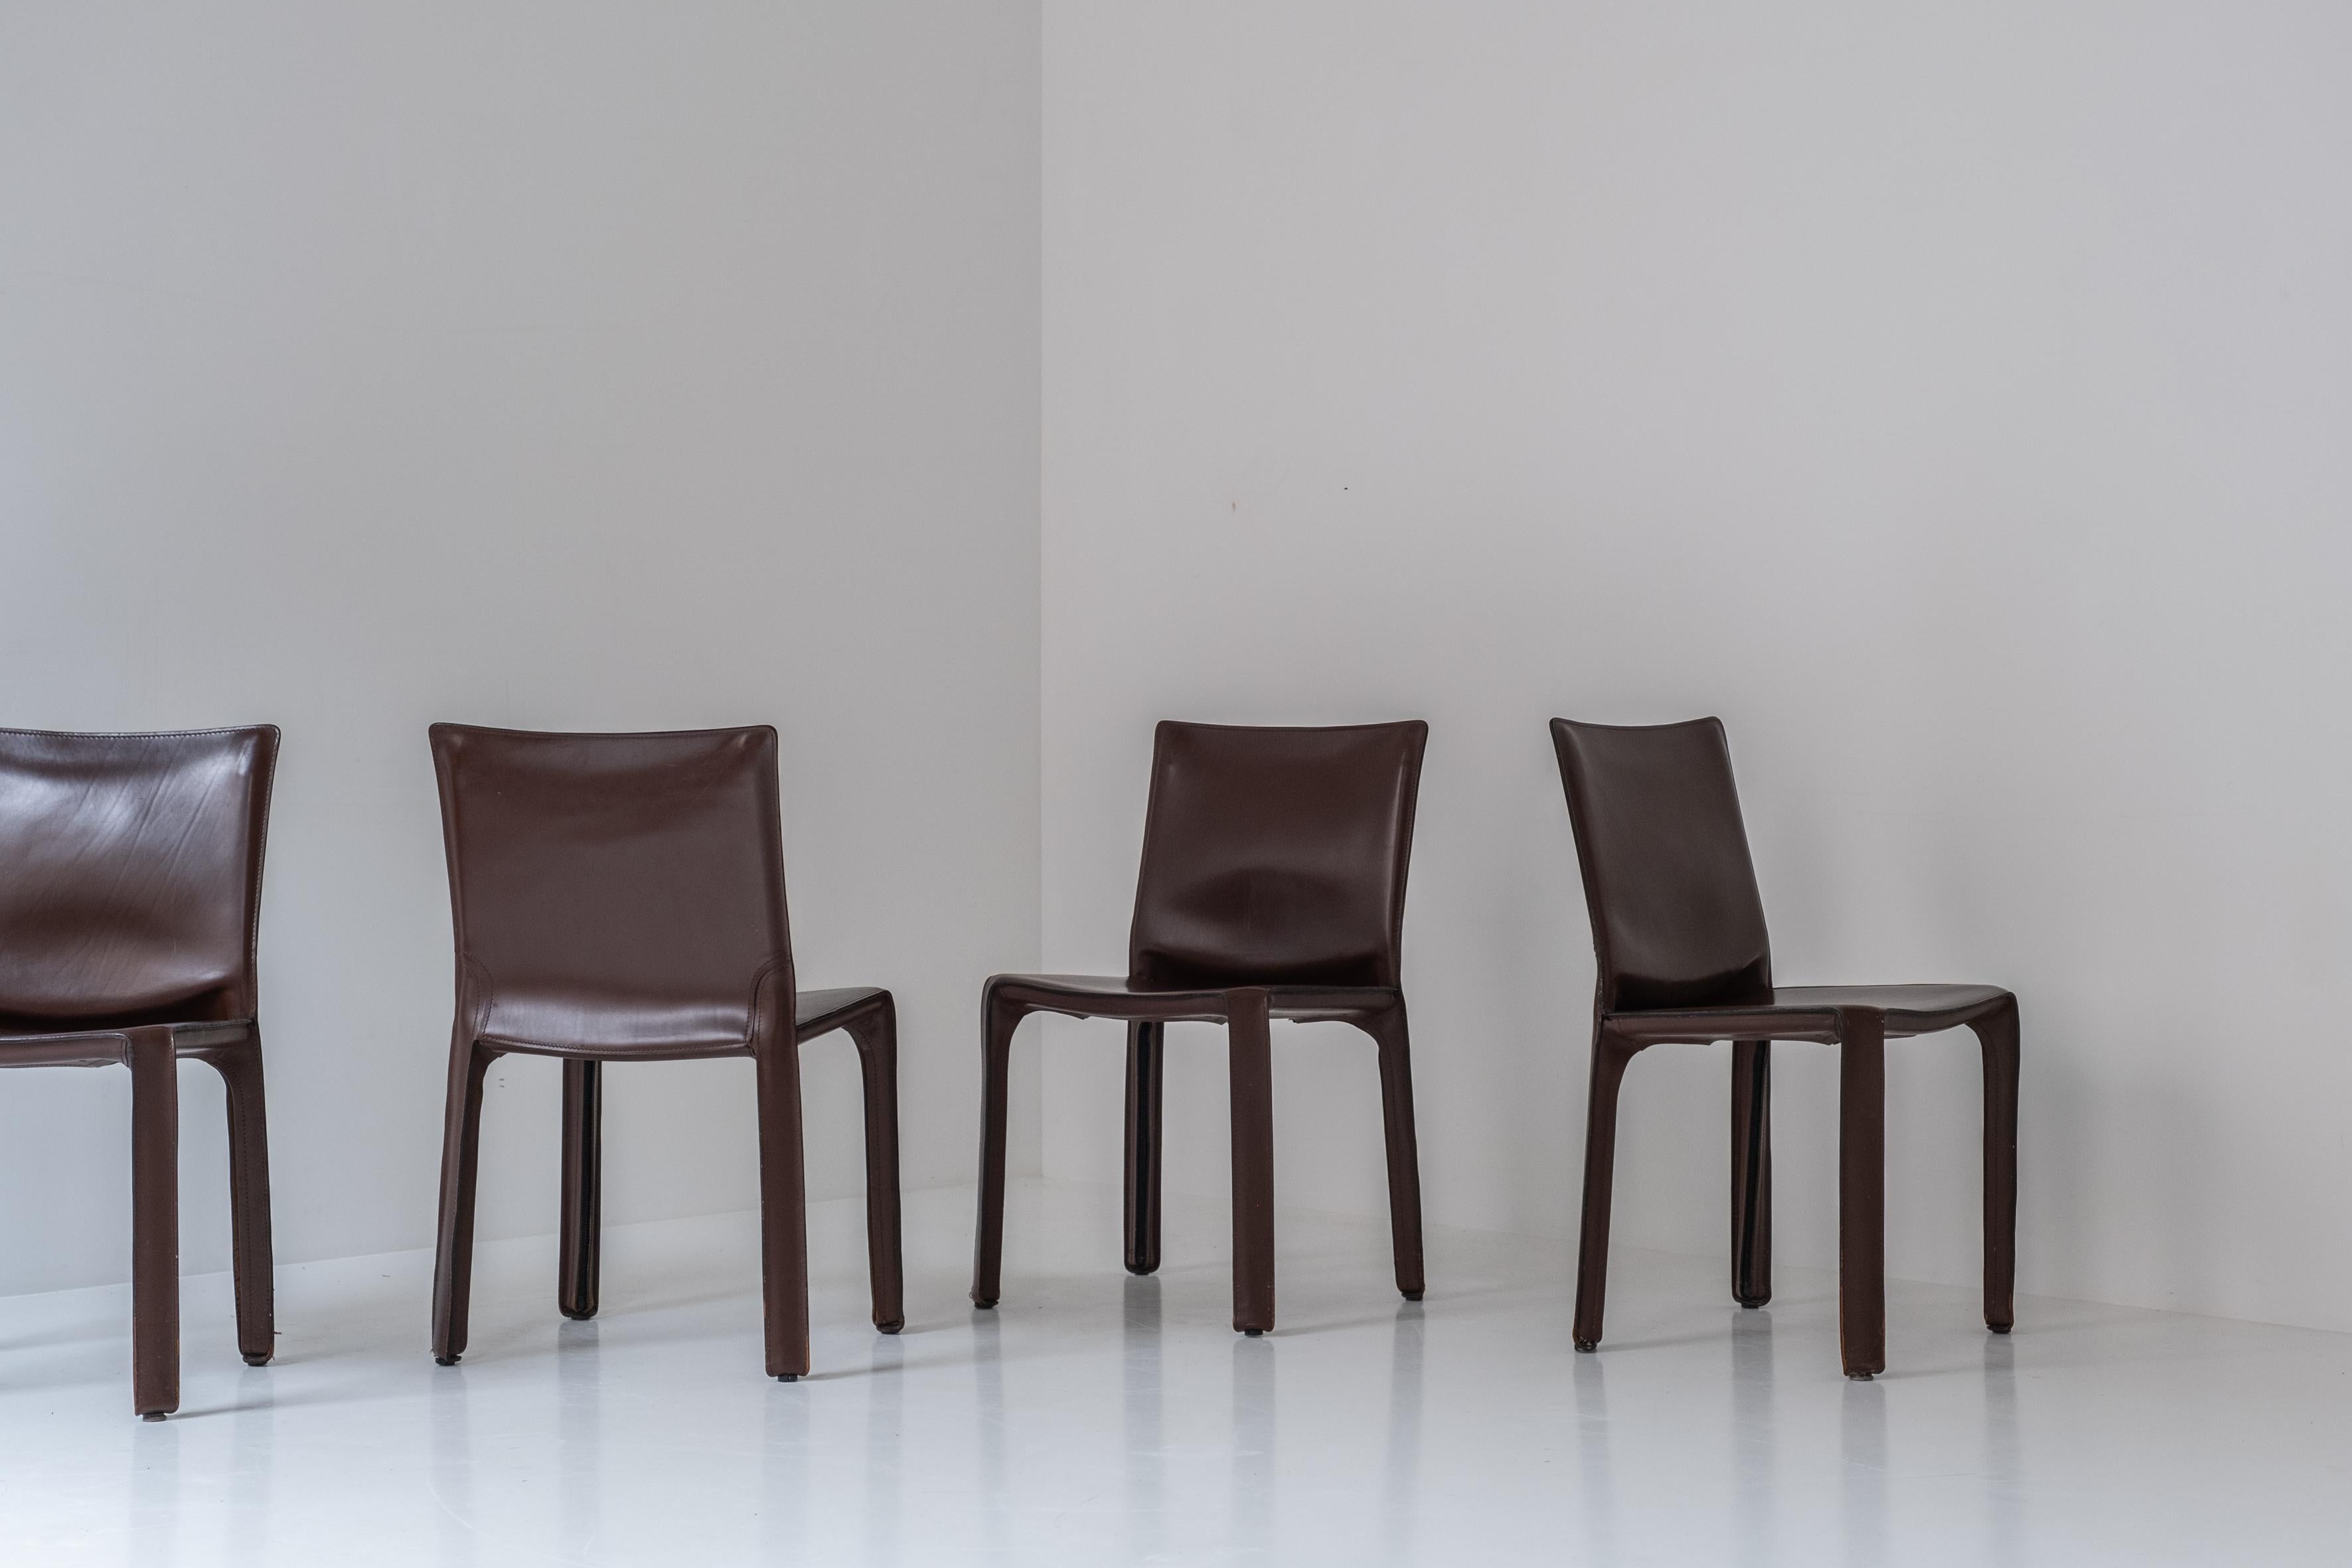 Italian Set of 4 “413” Cab Chairs by Mario Bellini for Cassina, Italy, 1977 For Sale